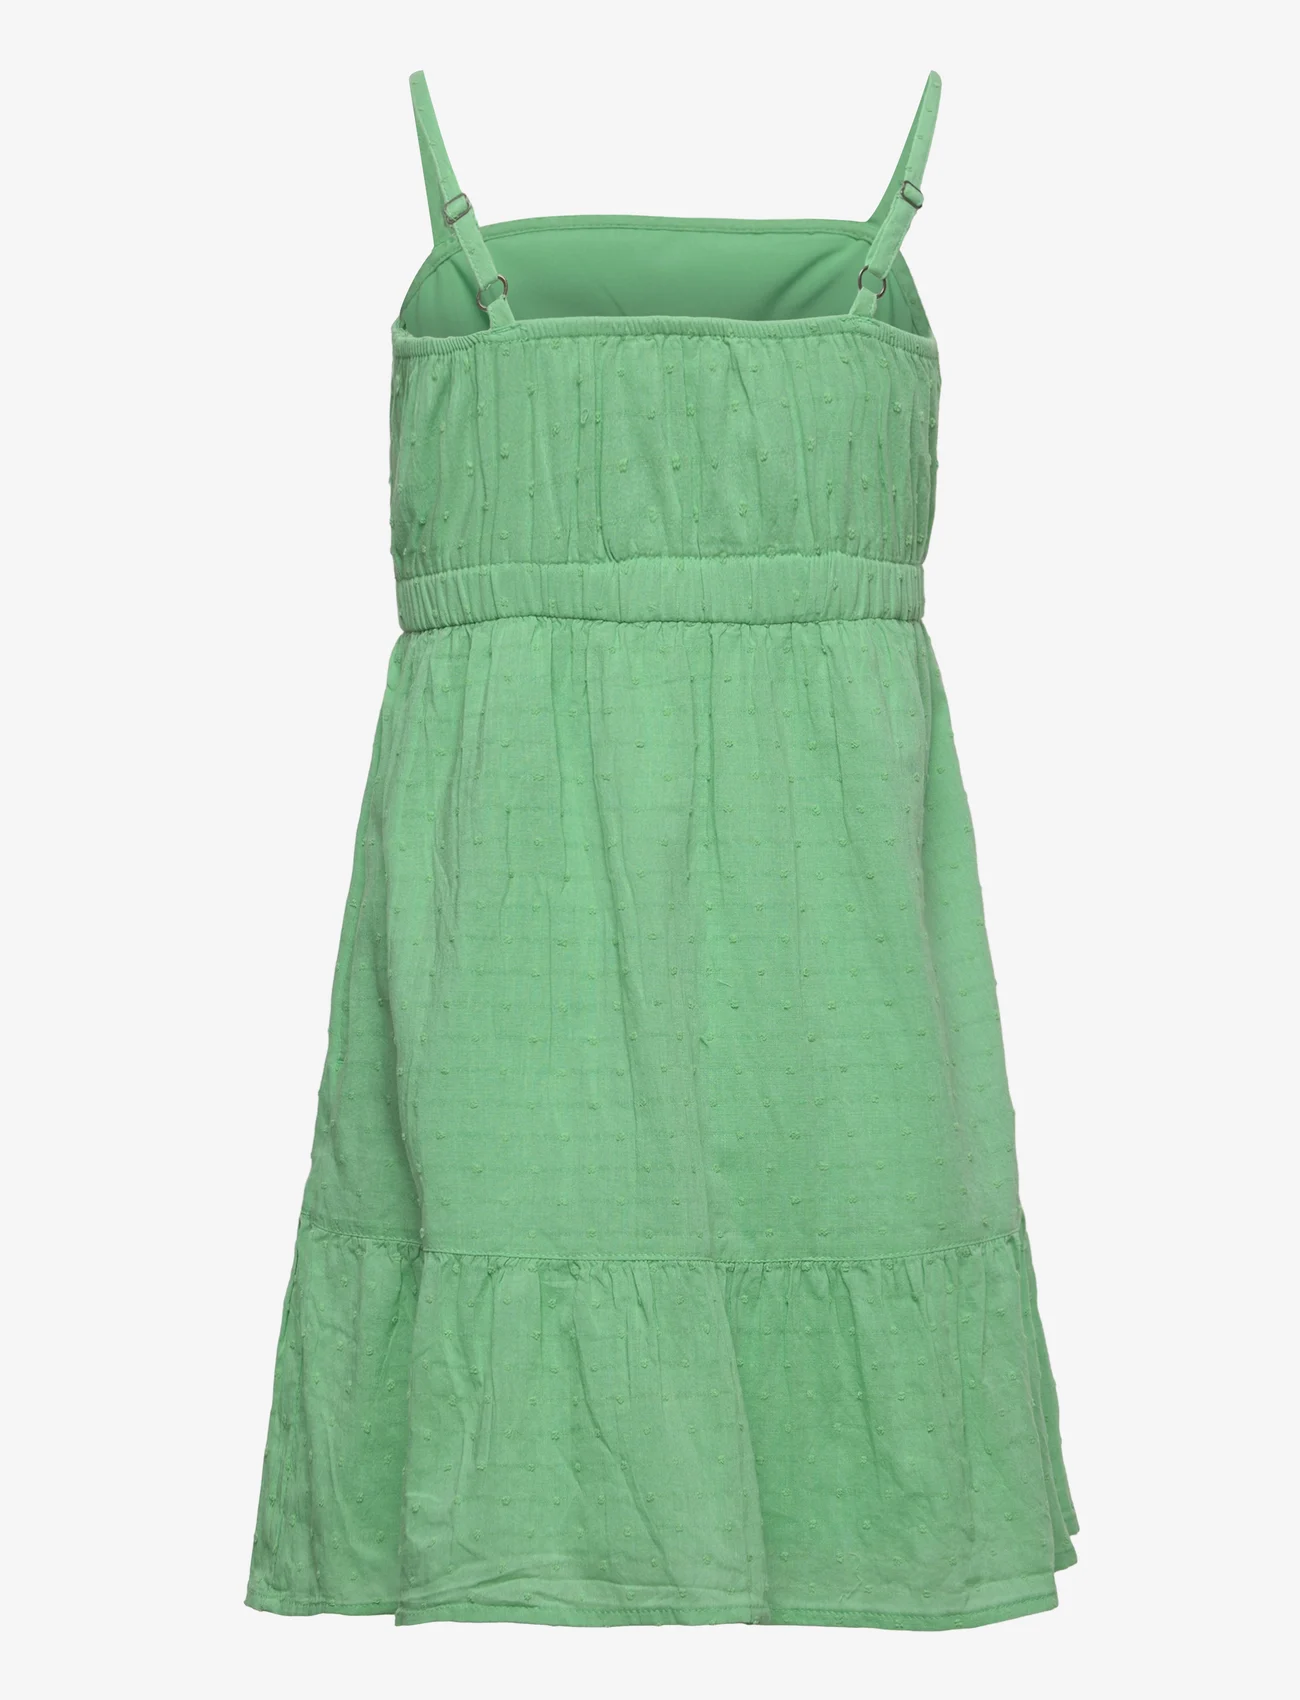 Abercrombie & Fitch - kids GIRLS DRESSES - green solid - 1